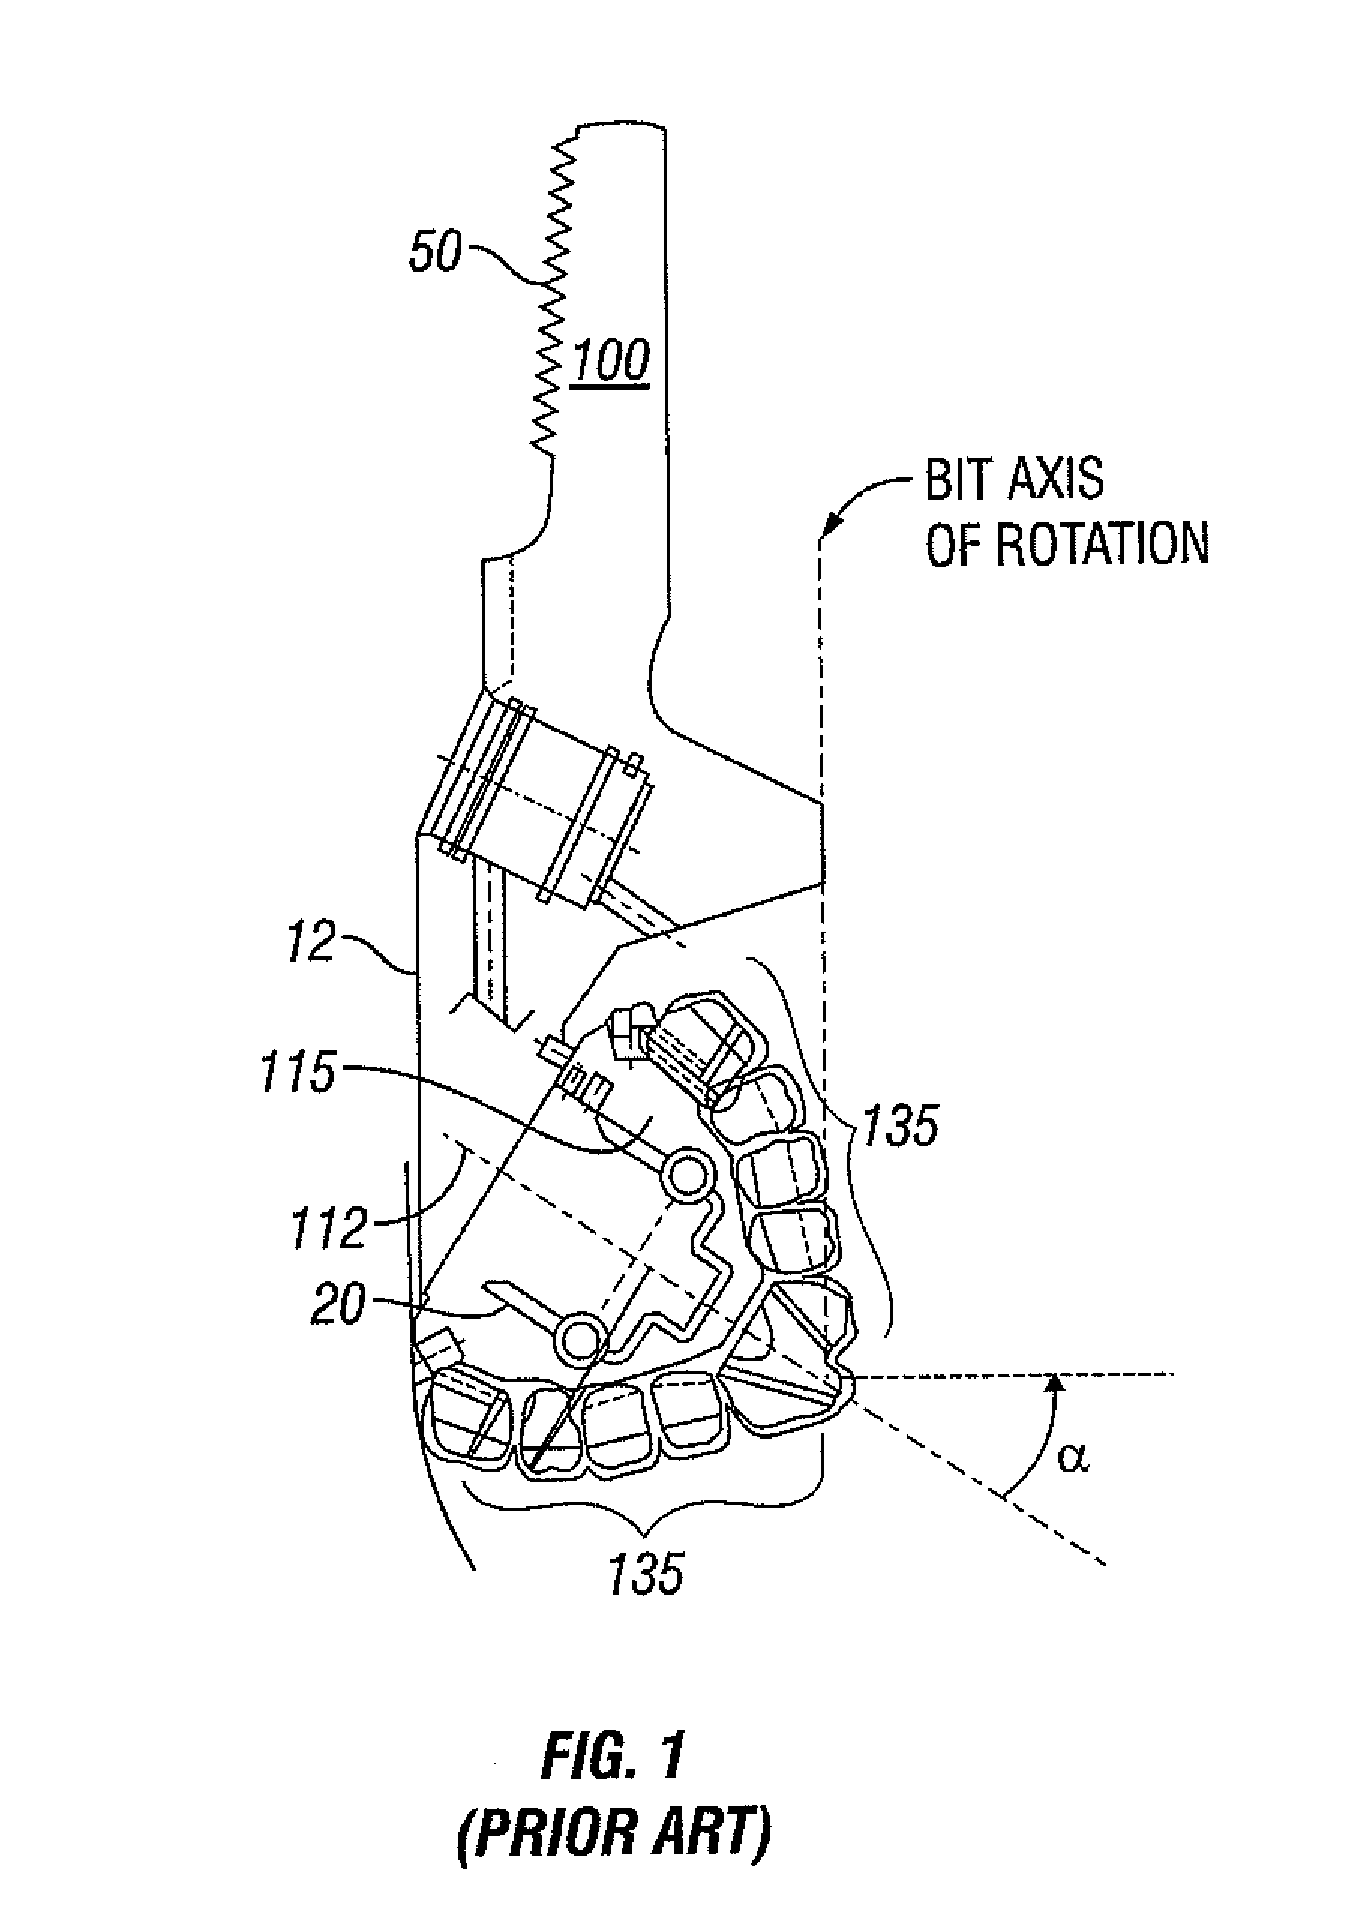 Two-cone drill bit with enhanced stability